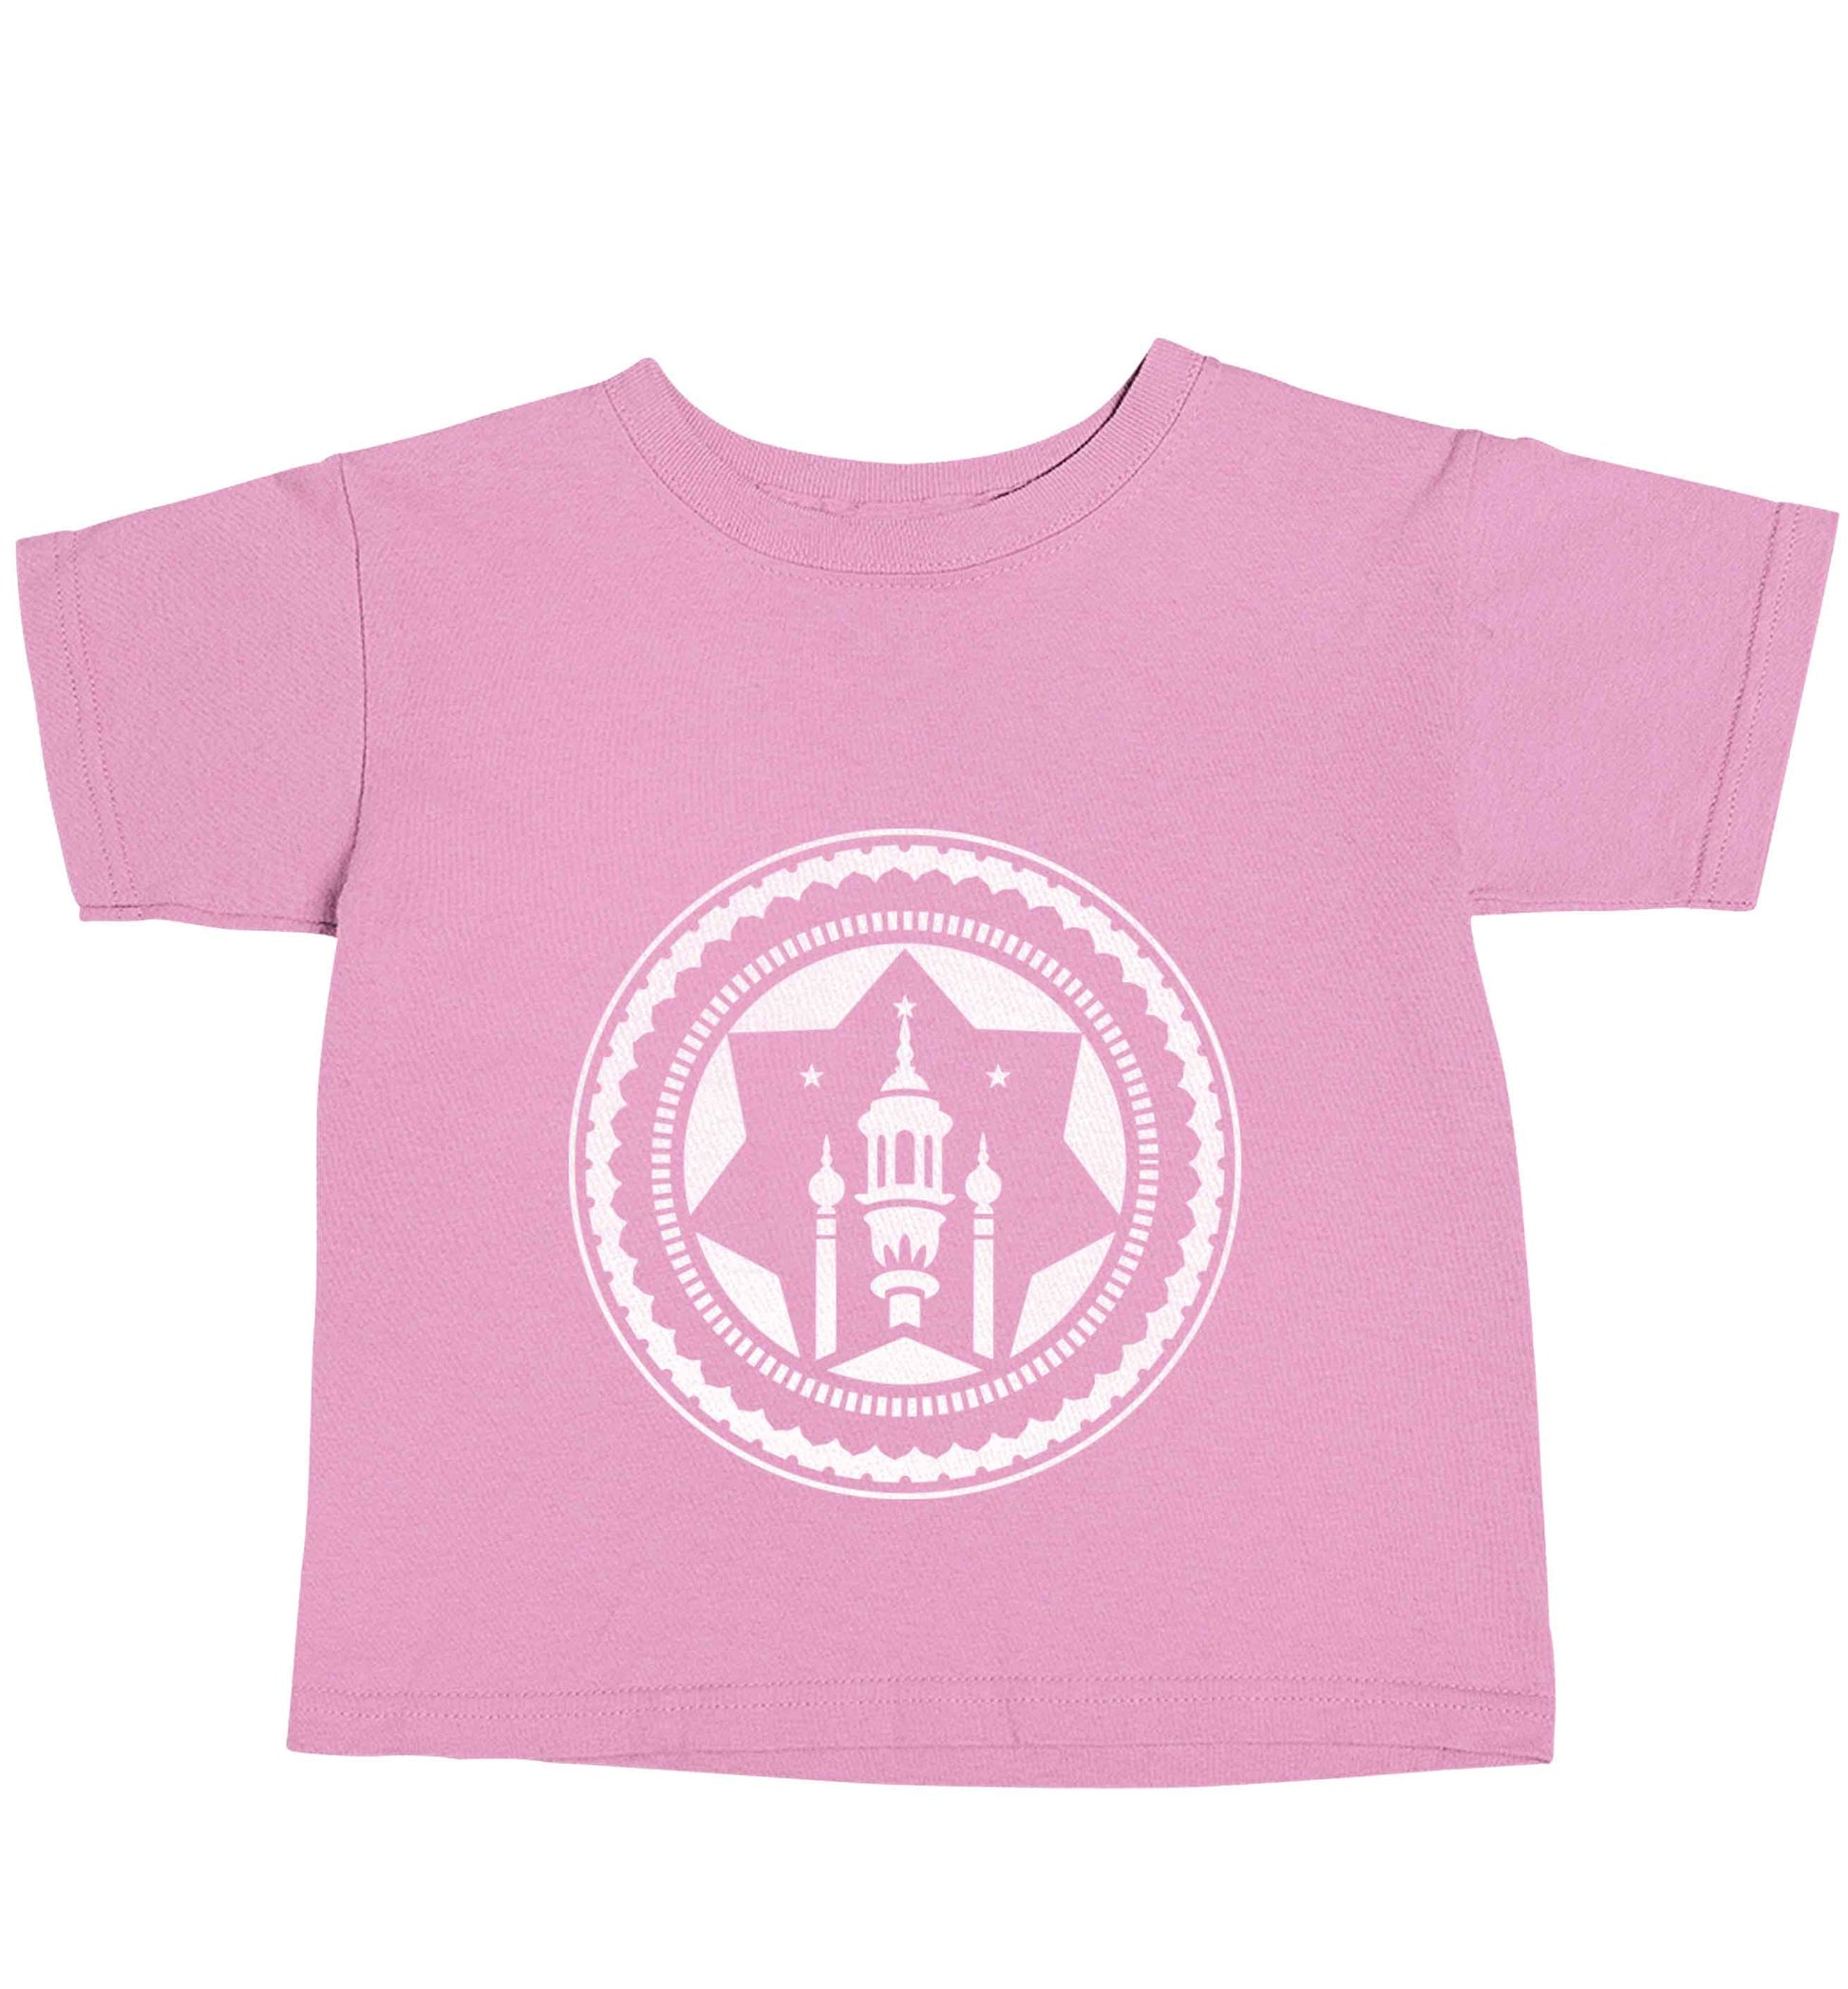 mosque light pink baby toddler Tshirt 2 Years